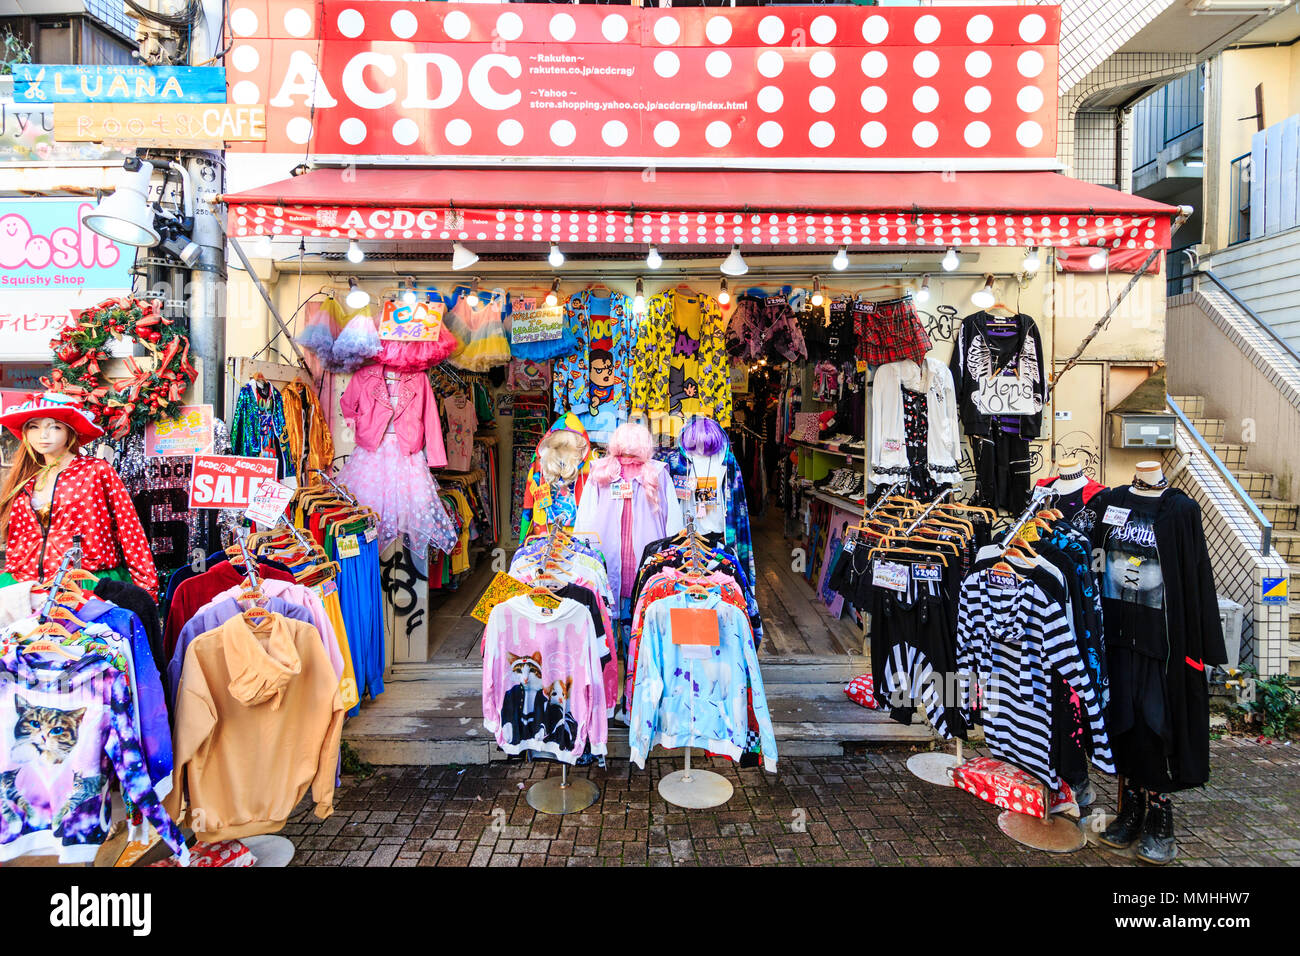 Tokyo, Harajuku, Takeshita street. Small branch of ACDC Rag famous fashion boutique. Clothing on many racks on pavement outside shop and entrance. Stock Photo